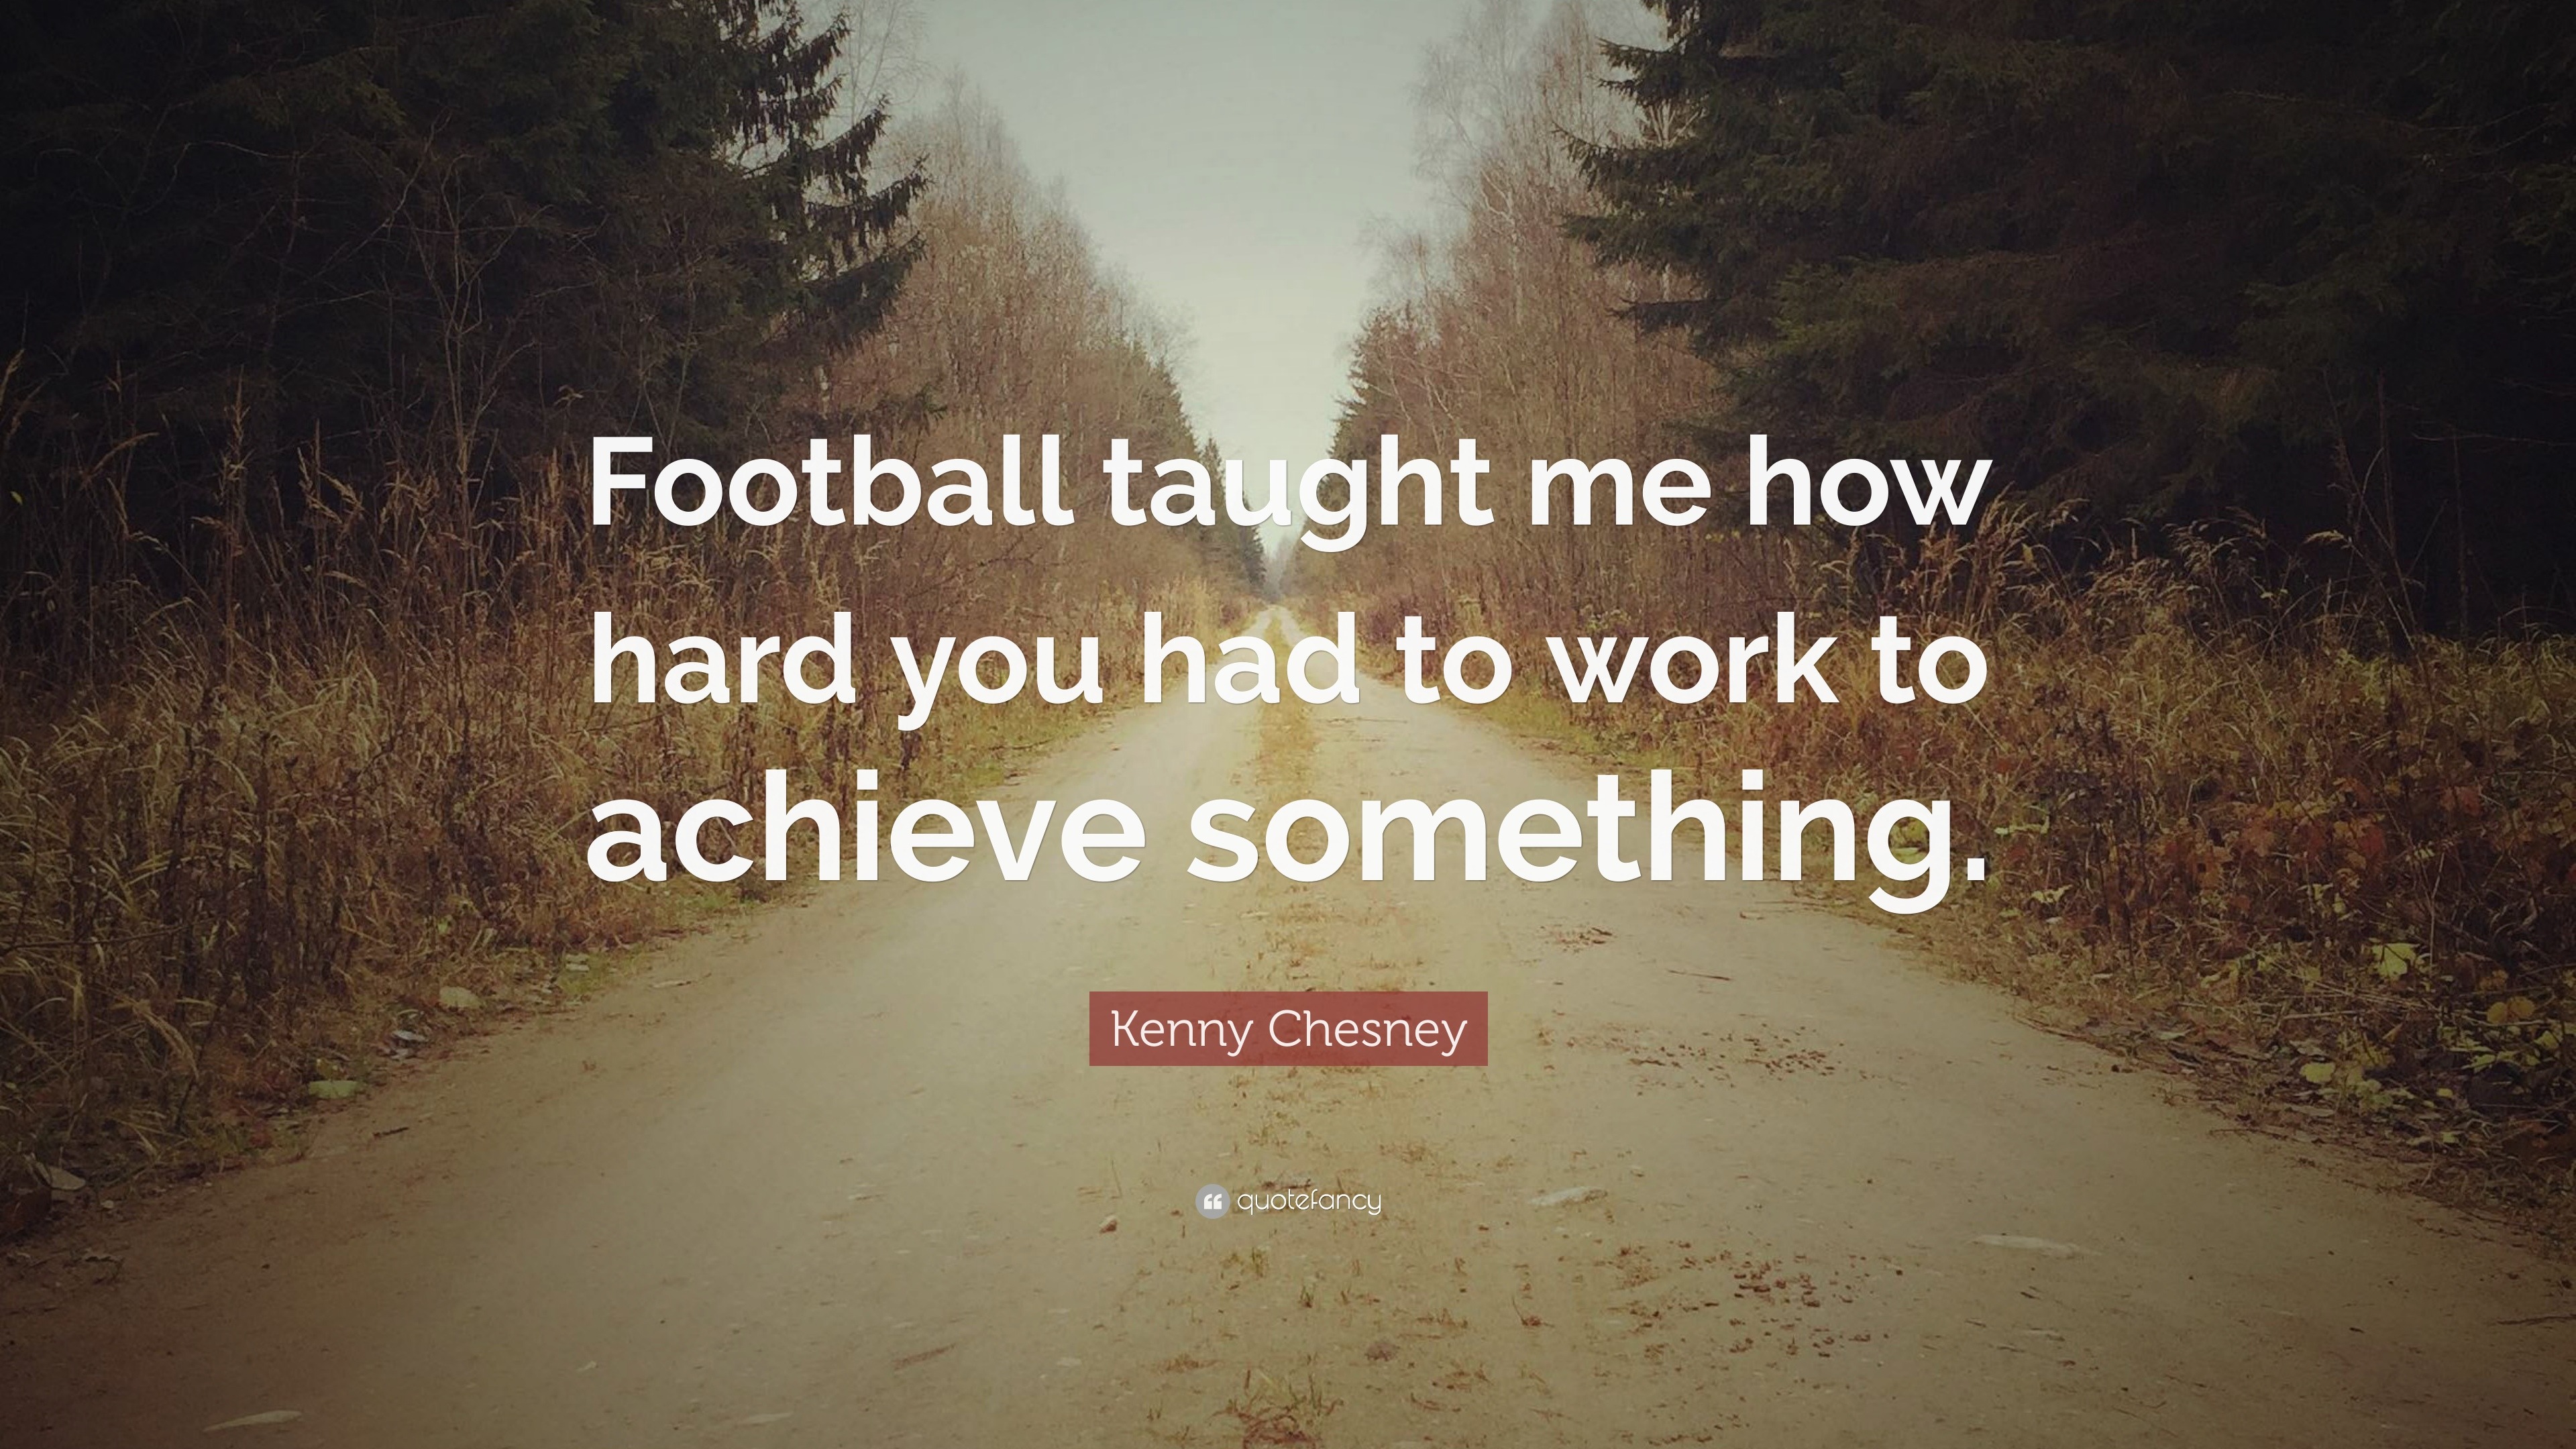 Kenny Chesney Quote: “Football taught me how hard you had to work to ...